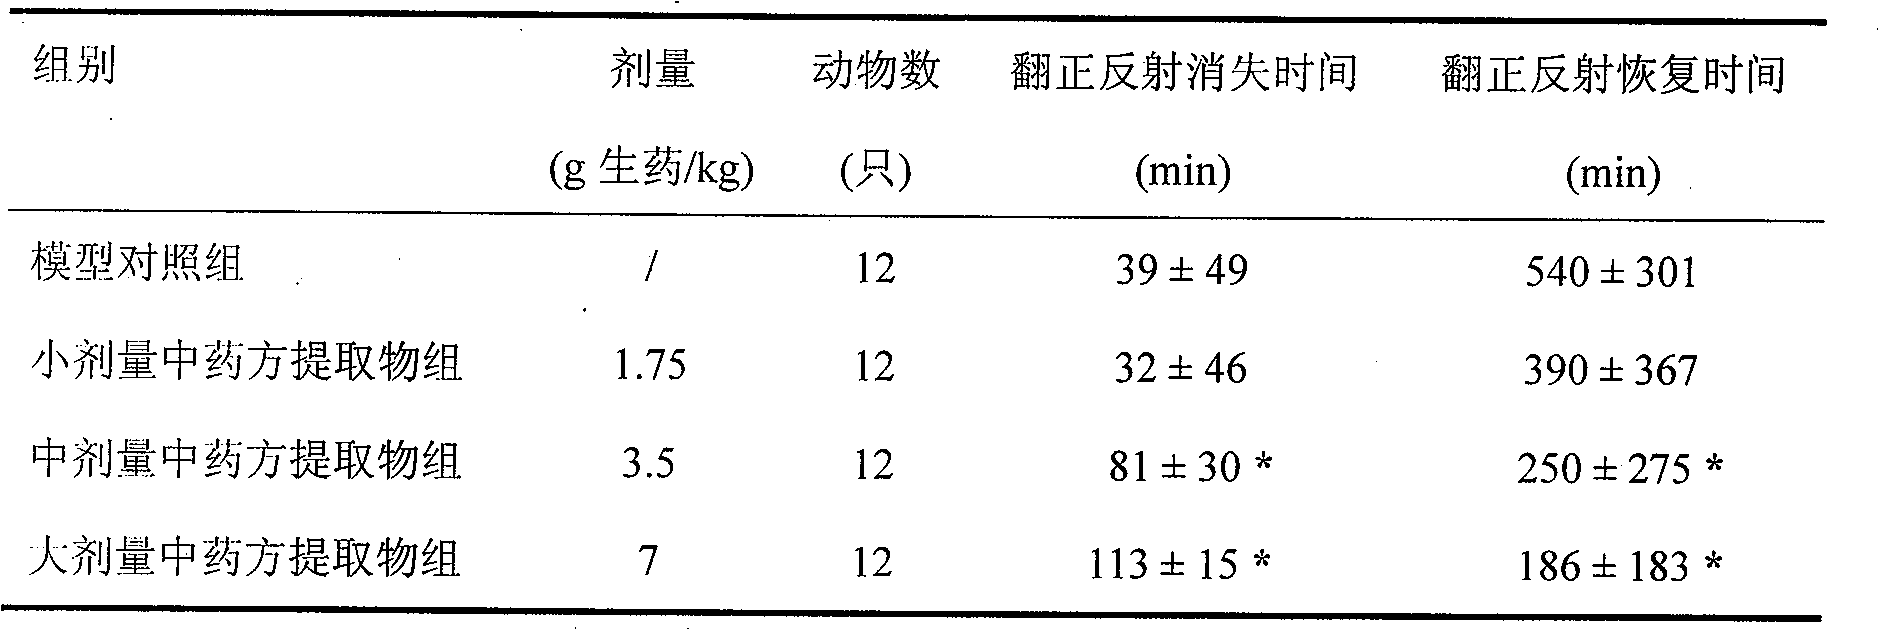 Chinese medicine composition for relieving alcoholism and protecting liver and preparation method thereof